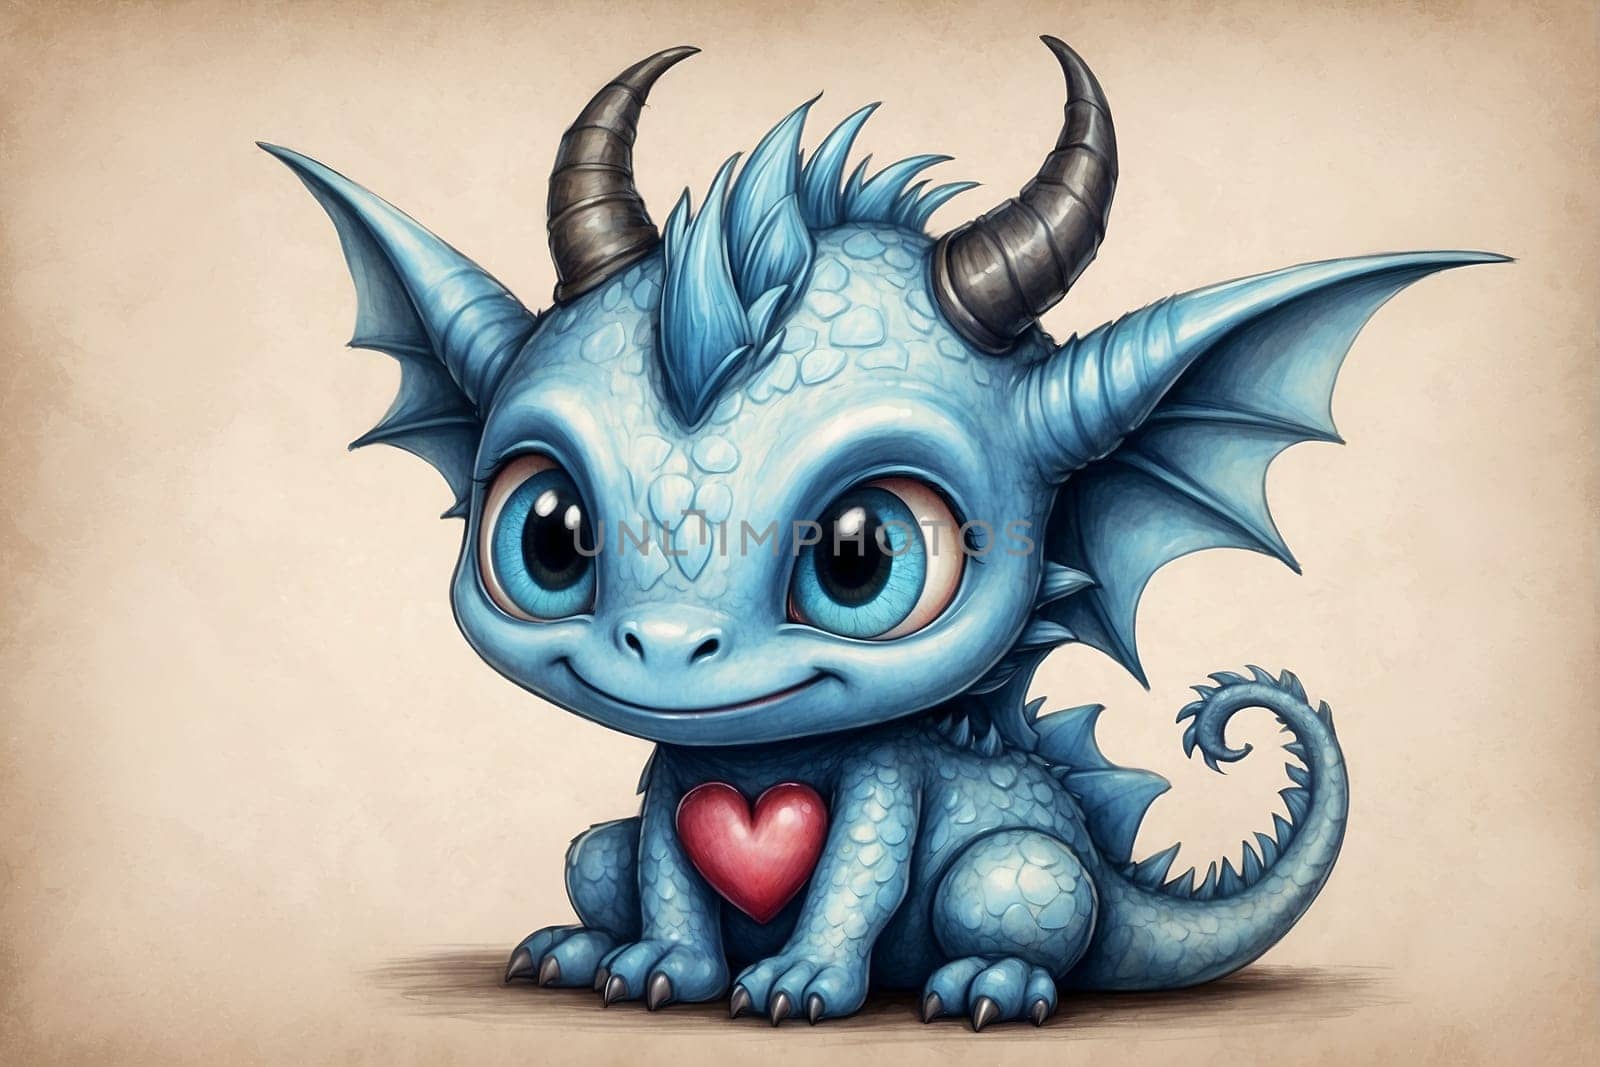 A blue, horned dragon with a heart-shaped marking on its chest.